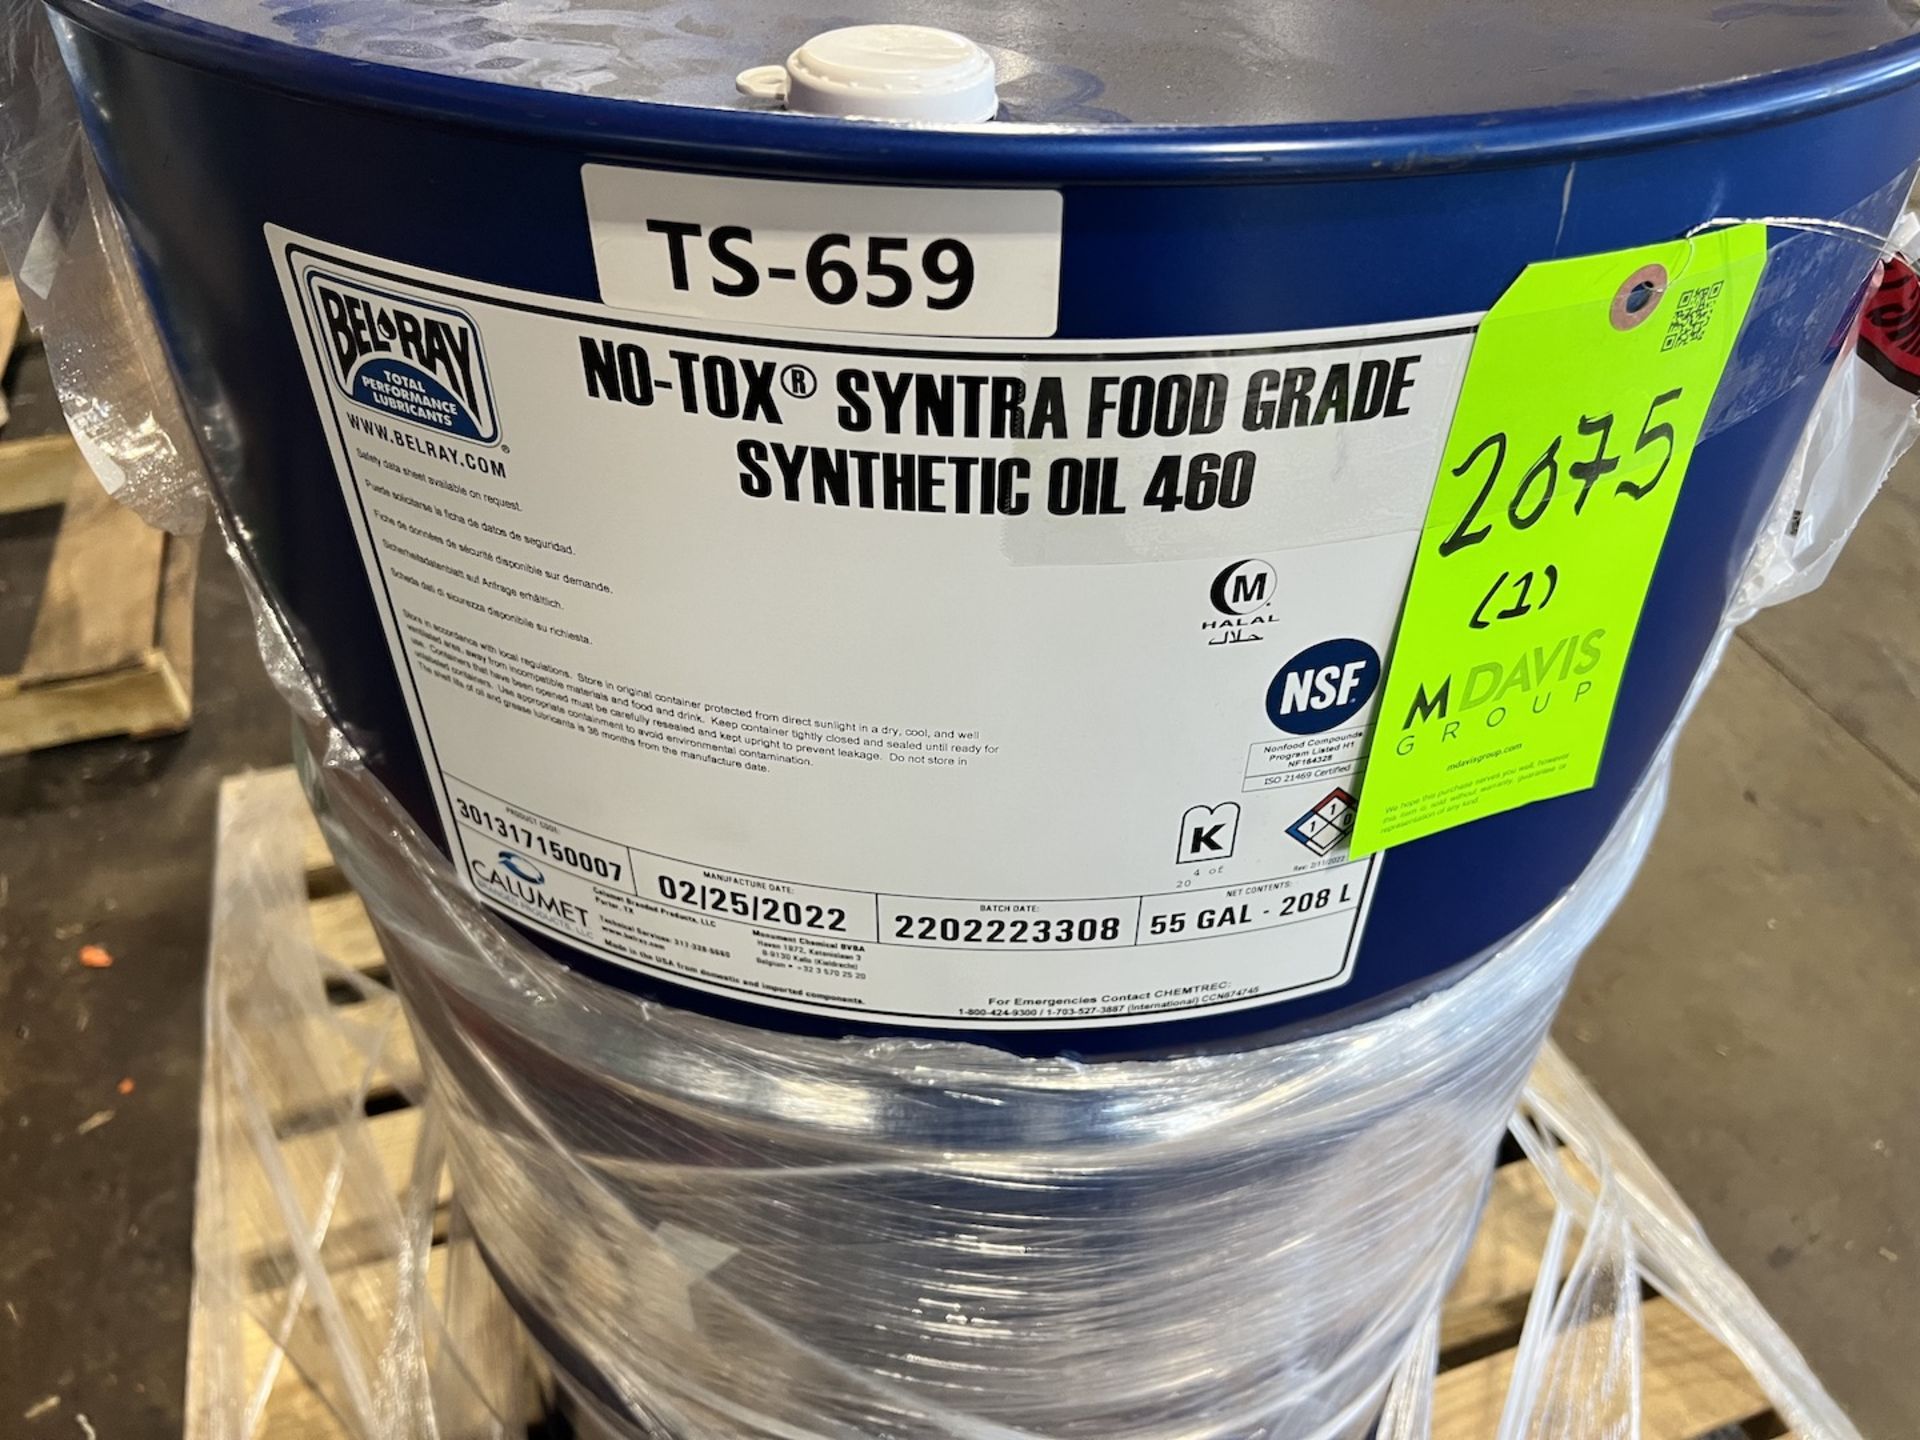 55-GALLON DRUM OF BELRAY NO-TOX SYNTRA FOOD GRADE SYNTHETIC OIL 460 - Image 2 of 2